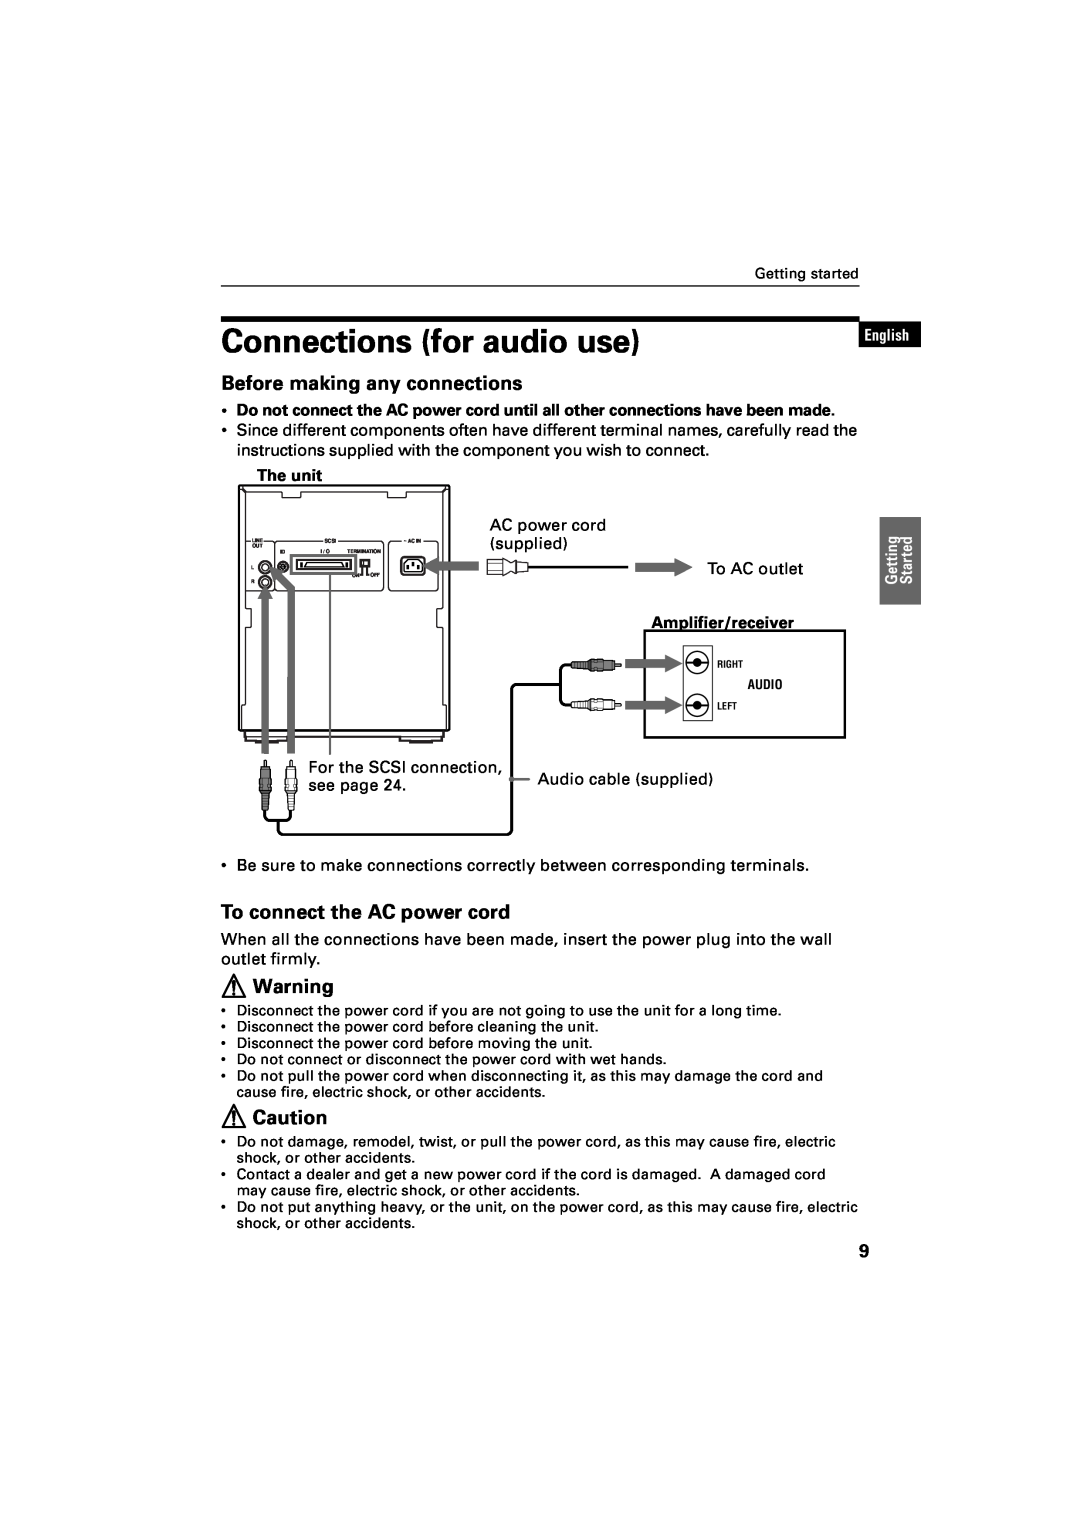 JVC XR-D400SL manual Connections for audio use, Before making any connections, To connect the AC power cord, English 